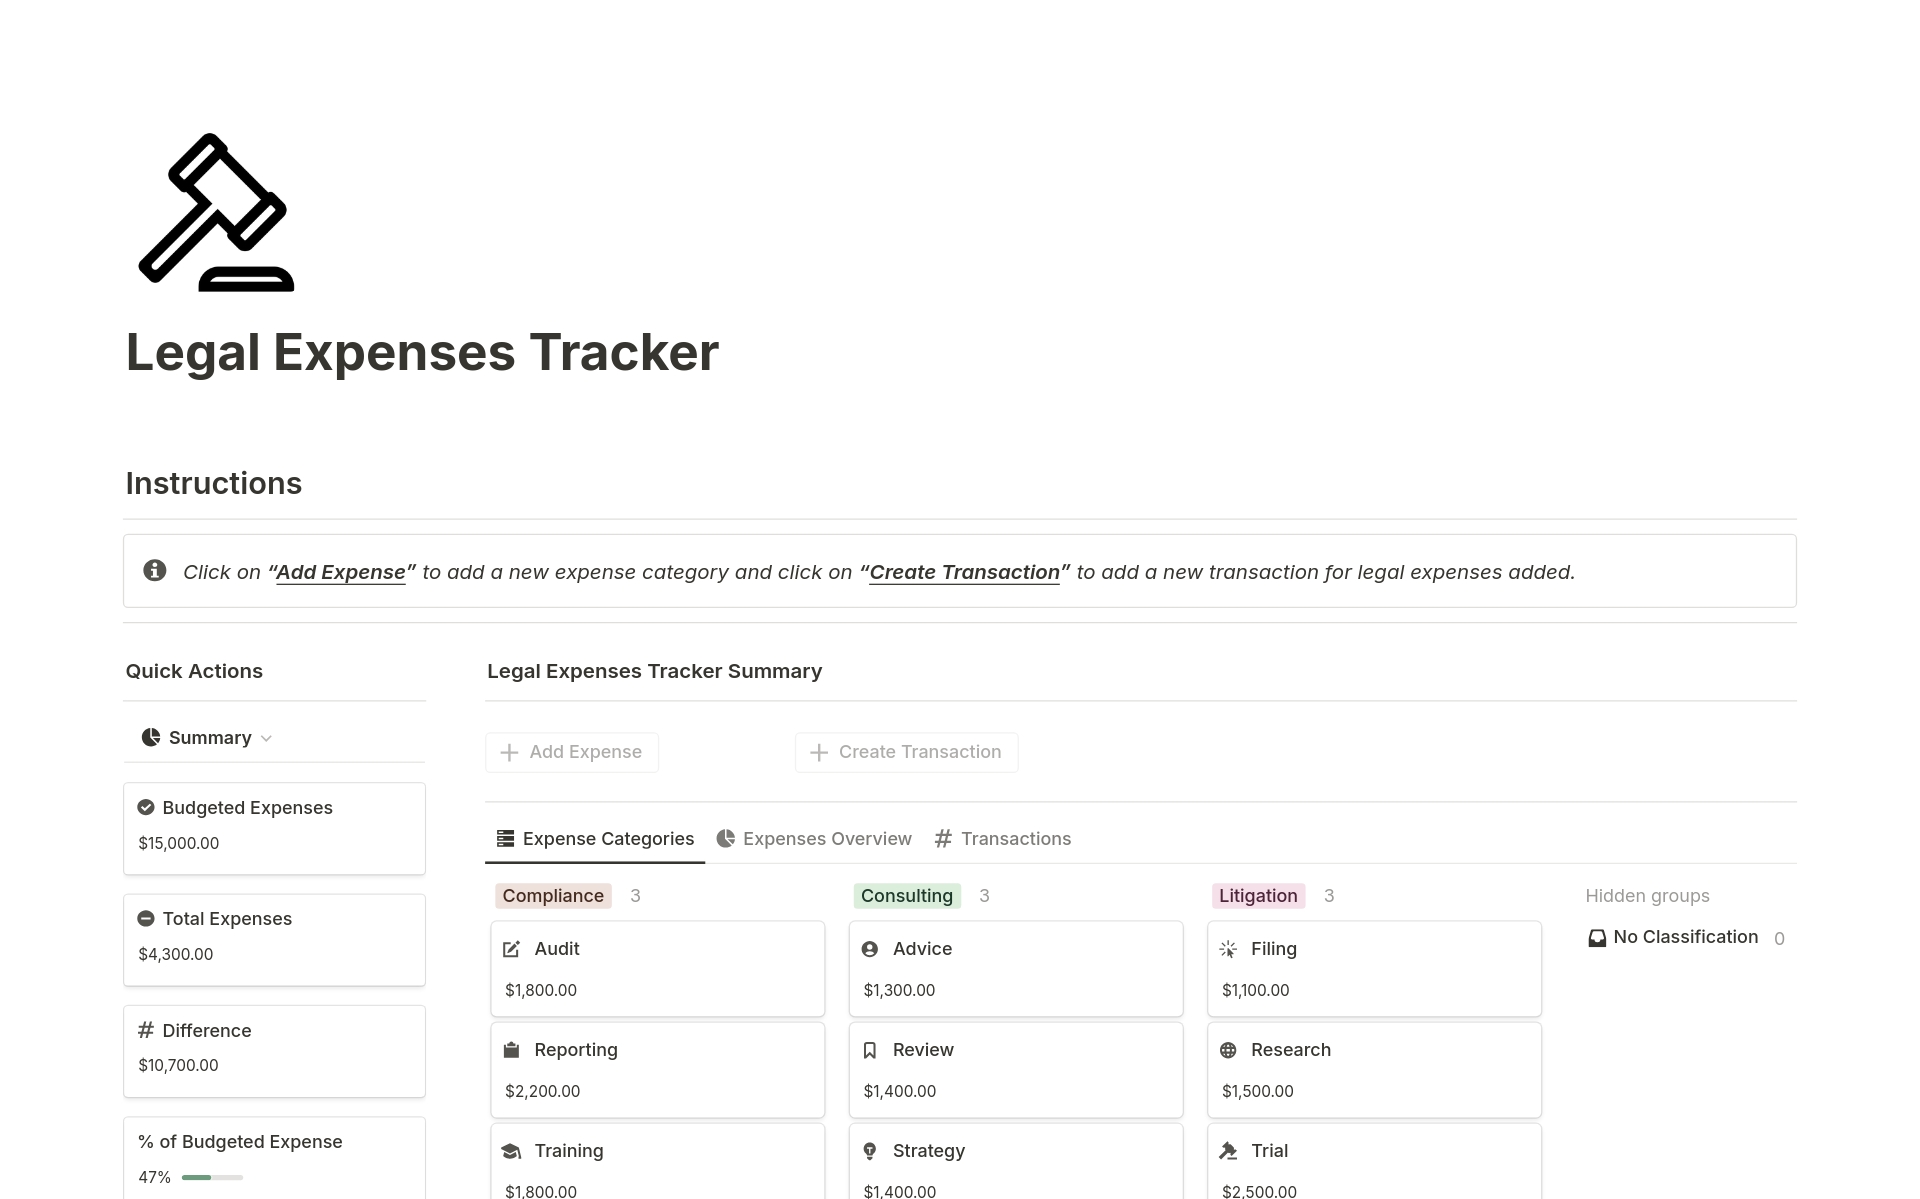 Ideal for those who are looking to manage the legal expenses of their business, this tracker helps you keep track of legal expenses such as compliance, consulting, litigation expenses and much more.